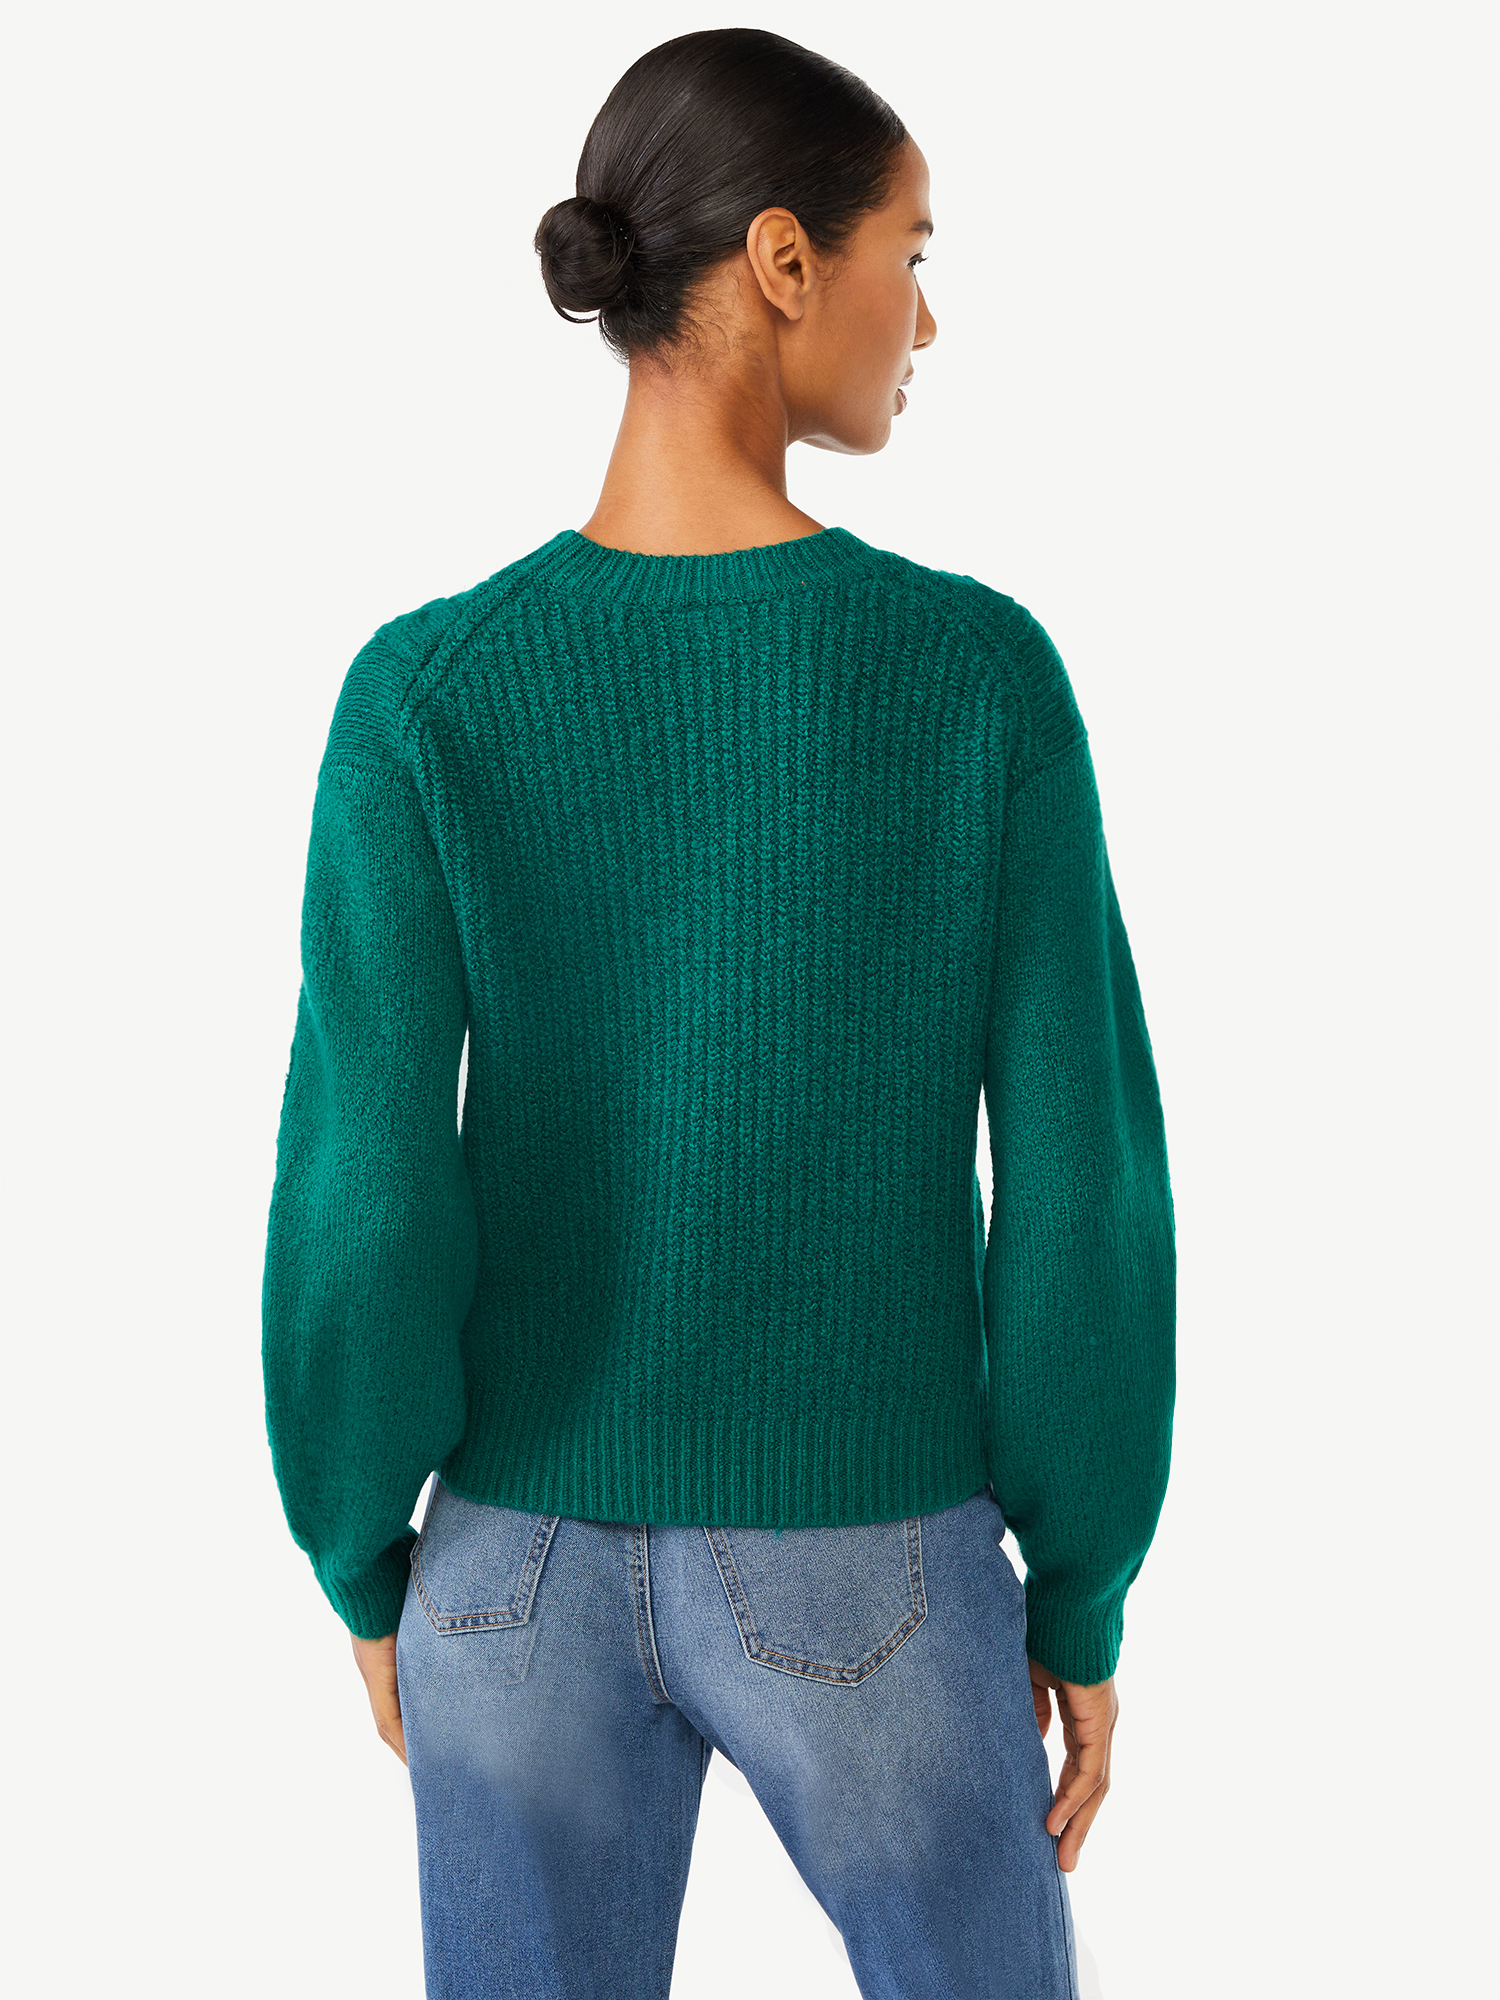 Scoop Women's Textured Cable Knit Sweater - image 3 of 5